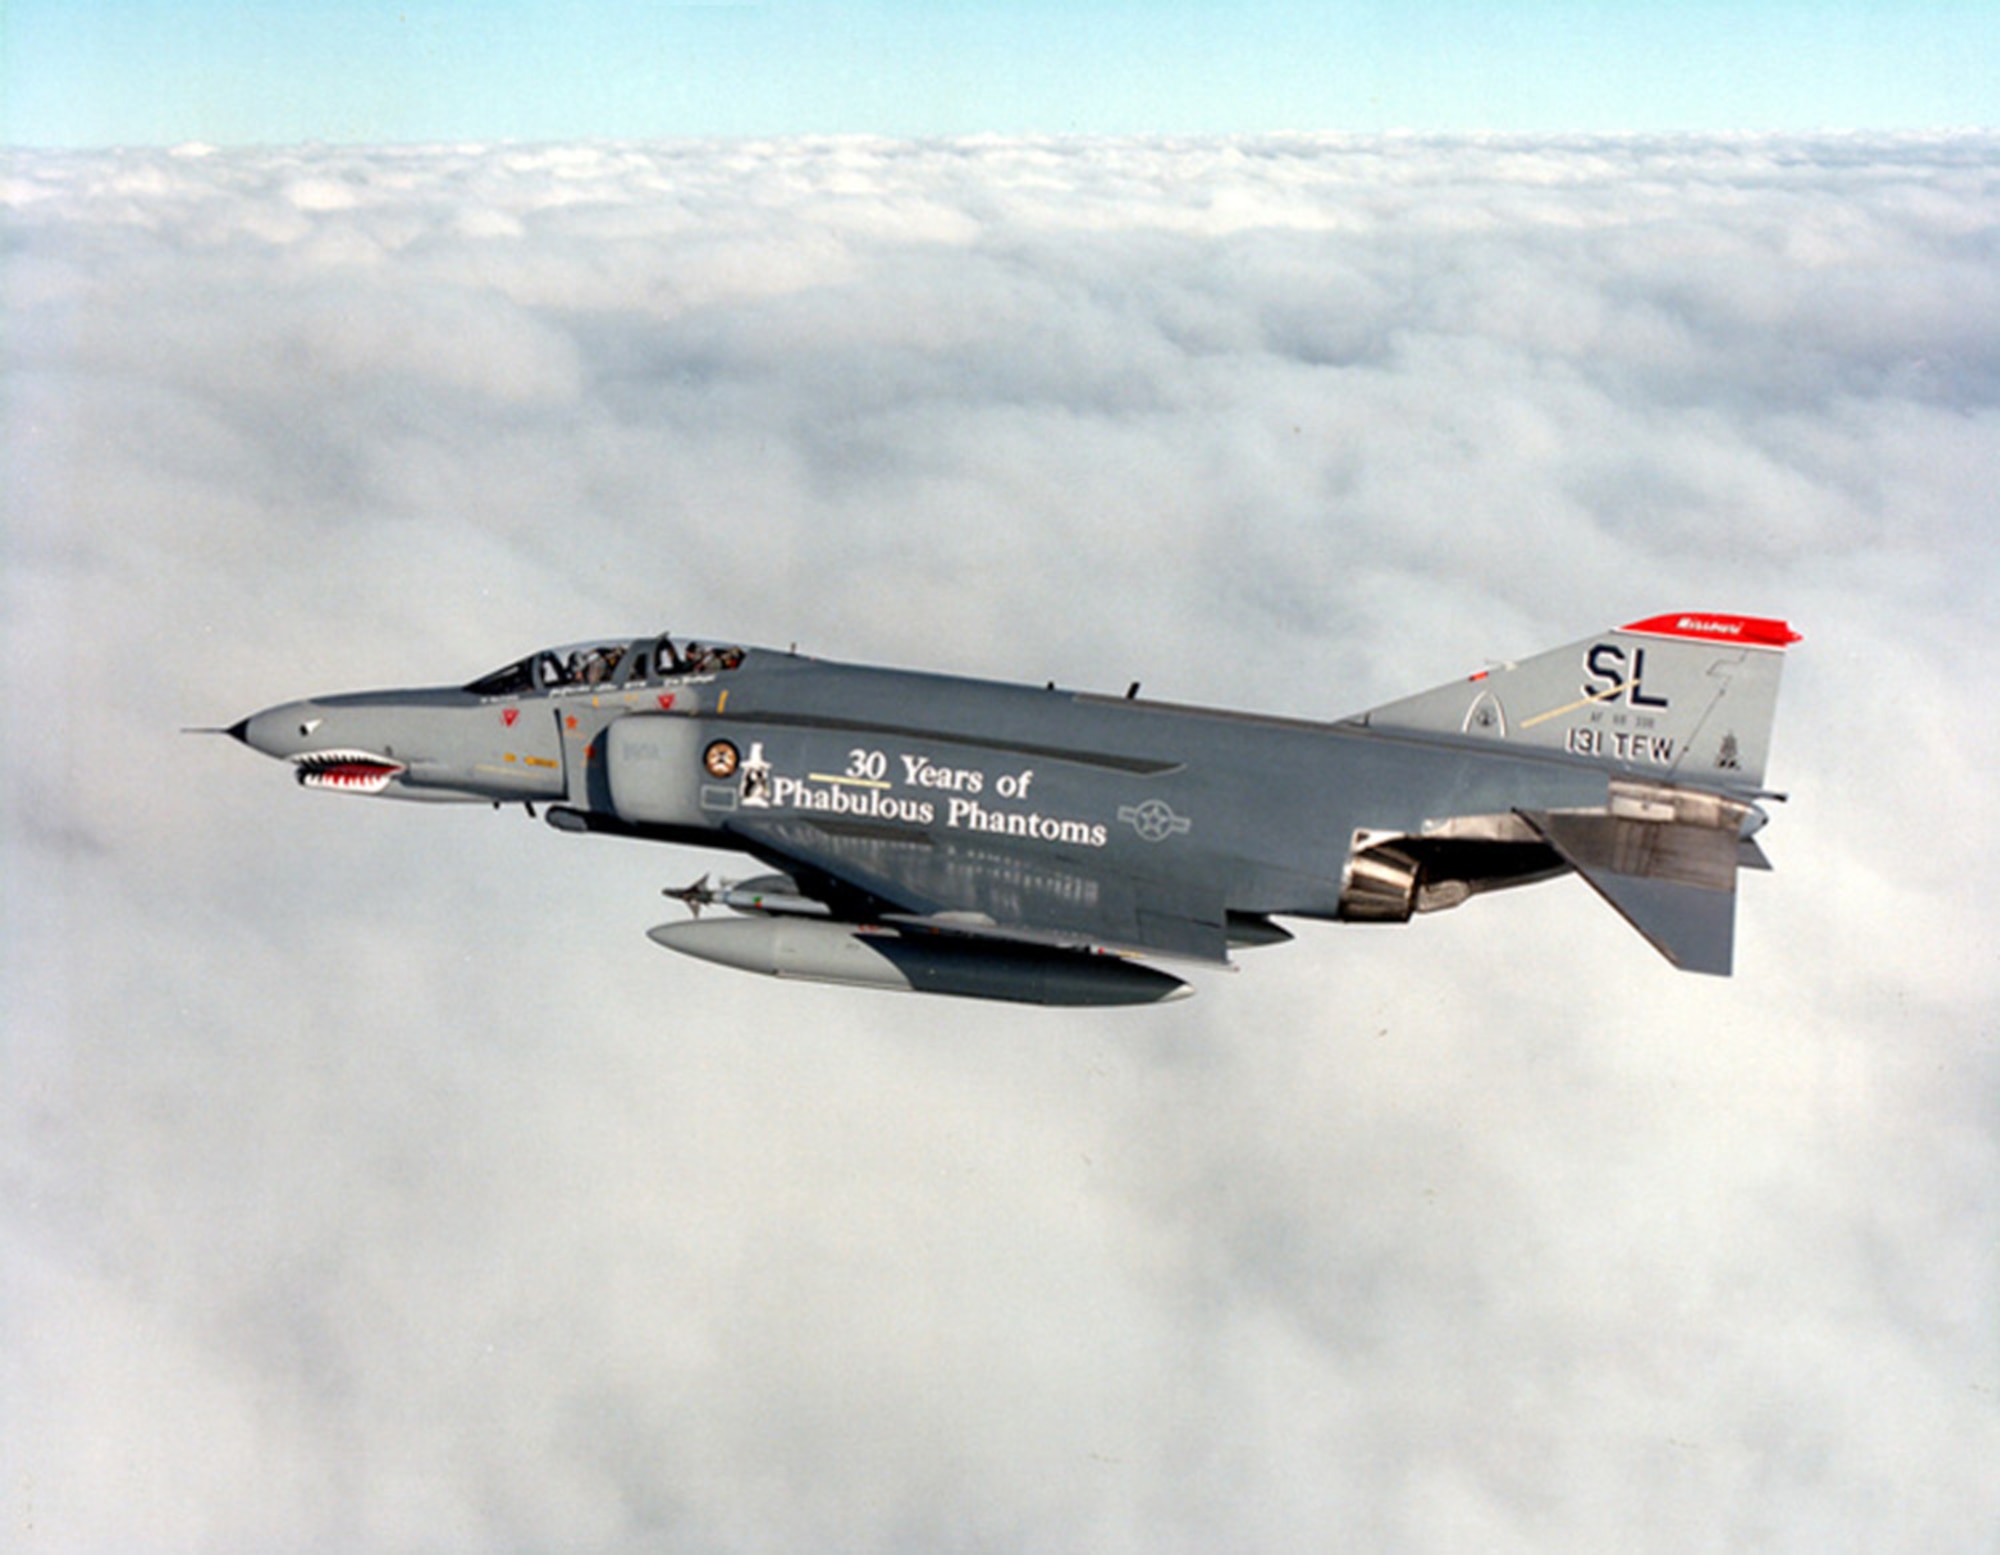 A McDonnell Douglas F-4-E of the 131st Tactical Fighter Wing, Missouri Air National Guard, flies high in 1989.   It is painted in celebration of the 30th anniversary of the F-4 Phantom.  (131st Bomb Wing file photo/RELEASED)